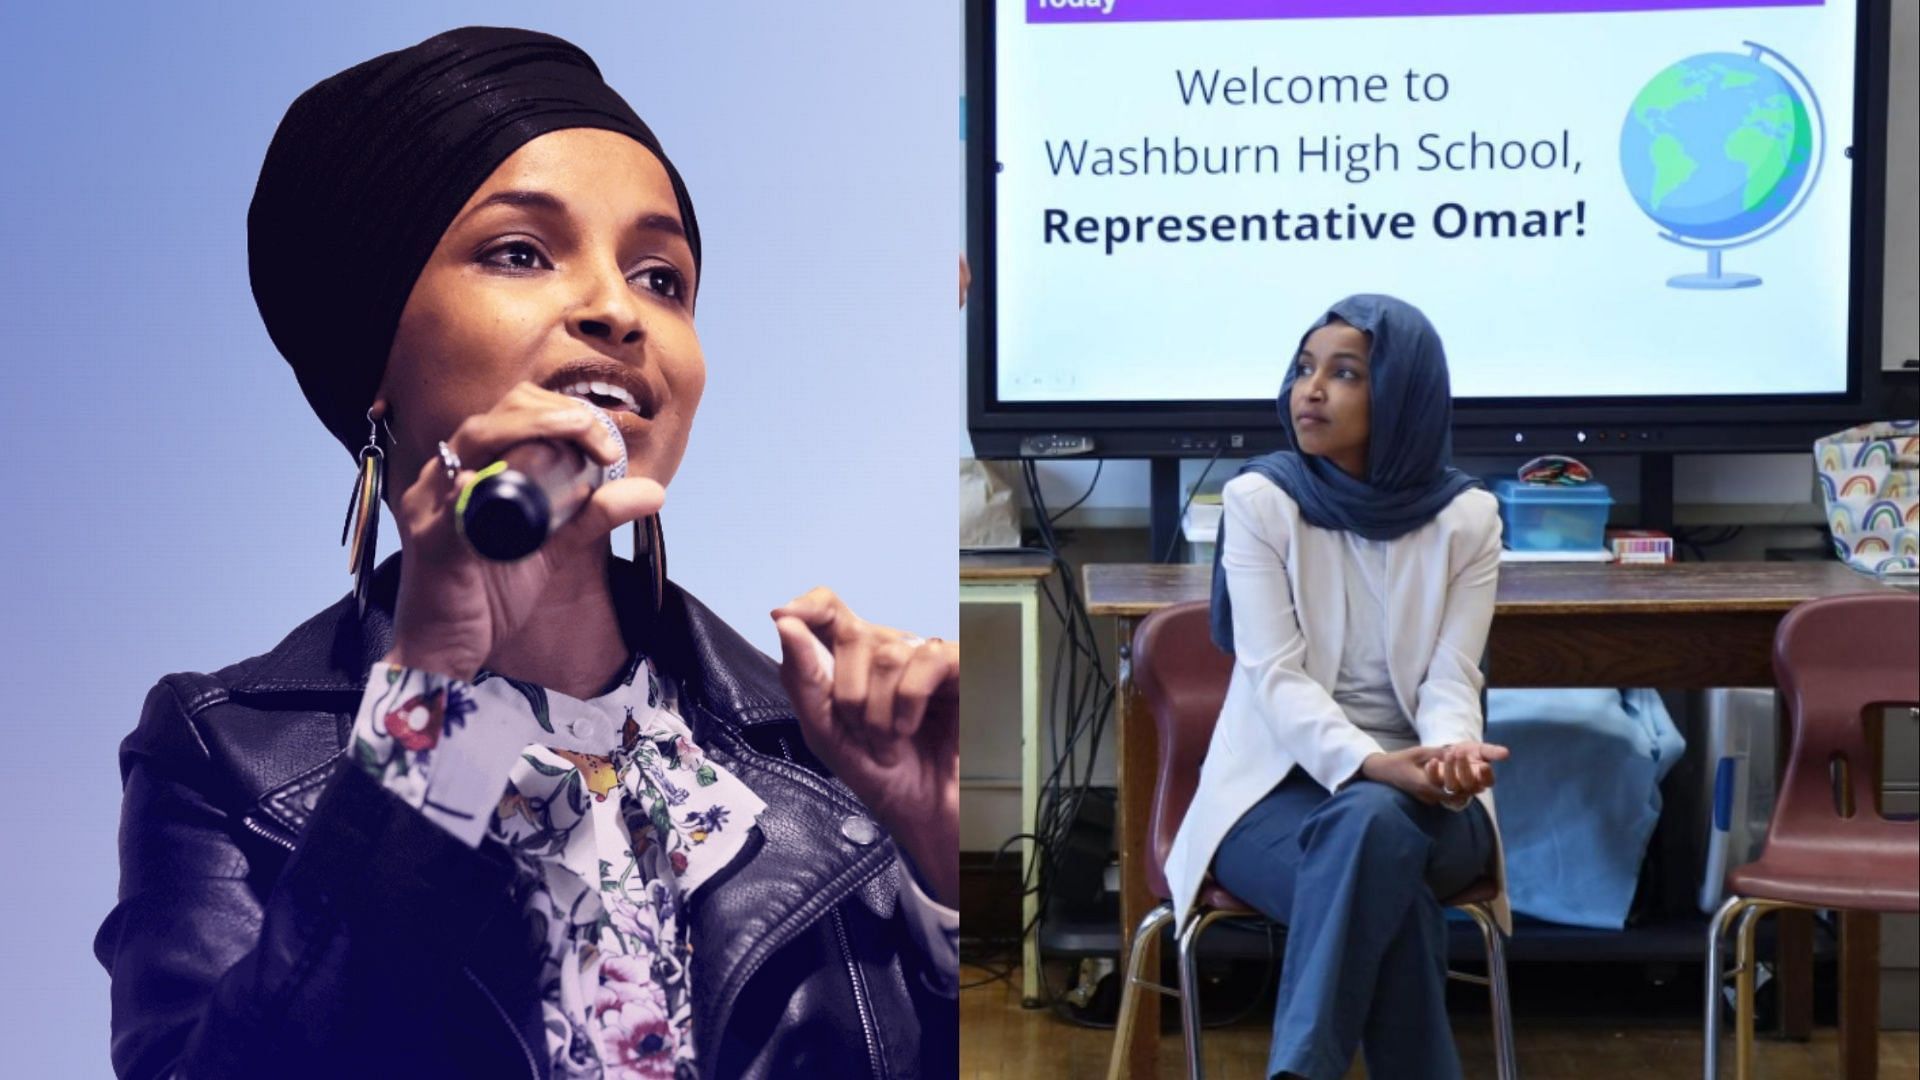 Ilhan Omar is married to a white man named Tim Mynett. (Image via Twitter/Rep. Ilhan Omar)